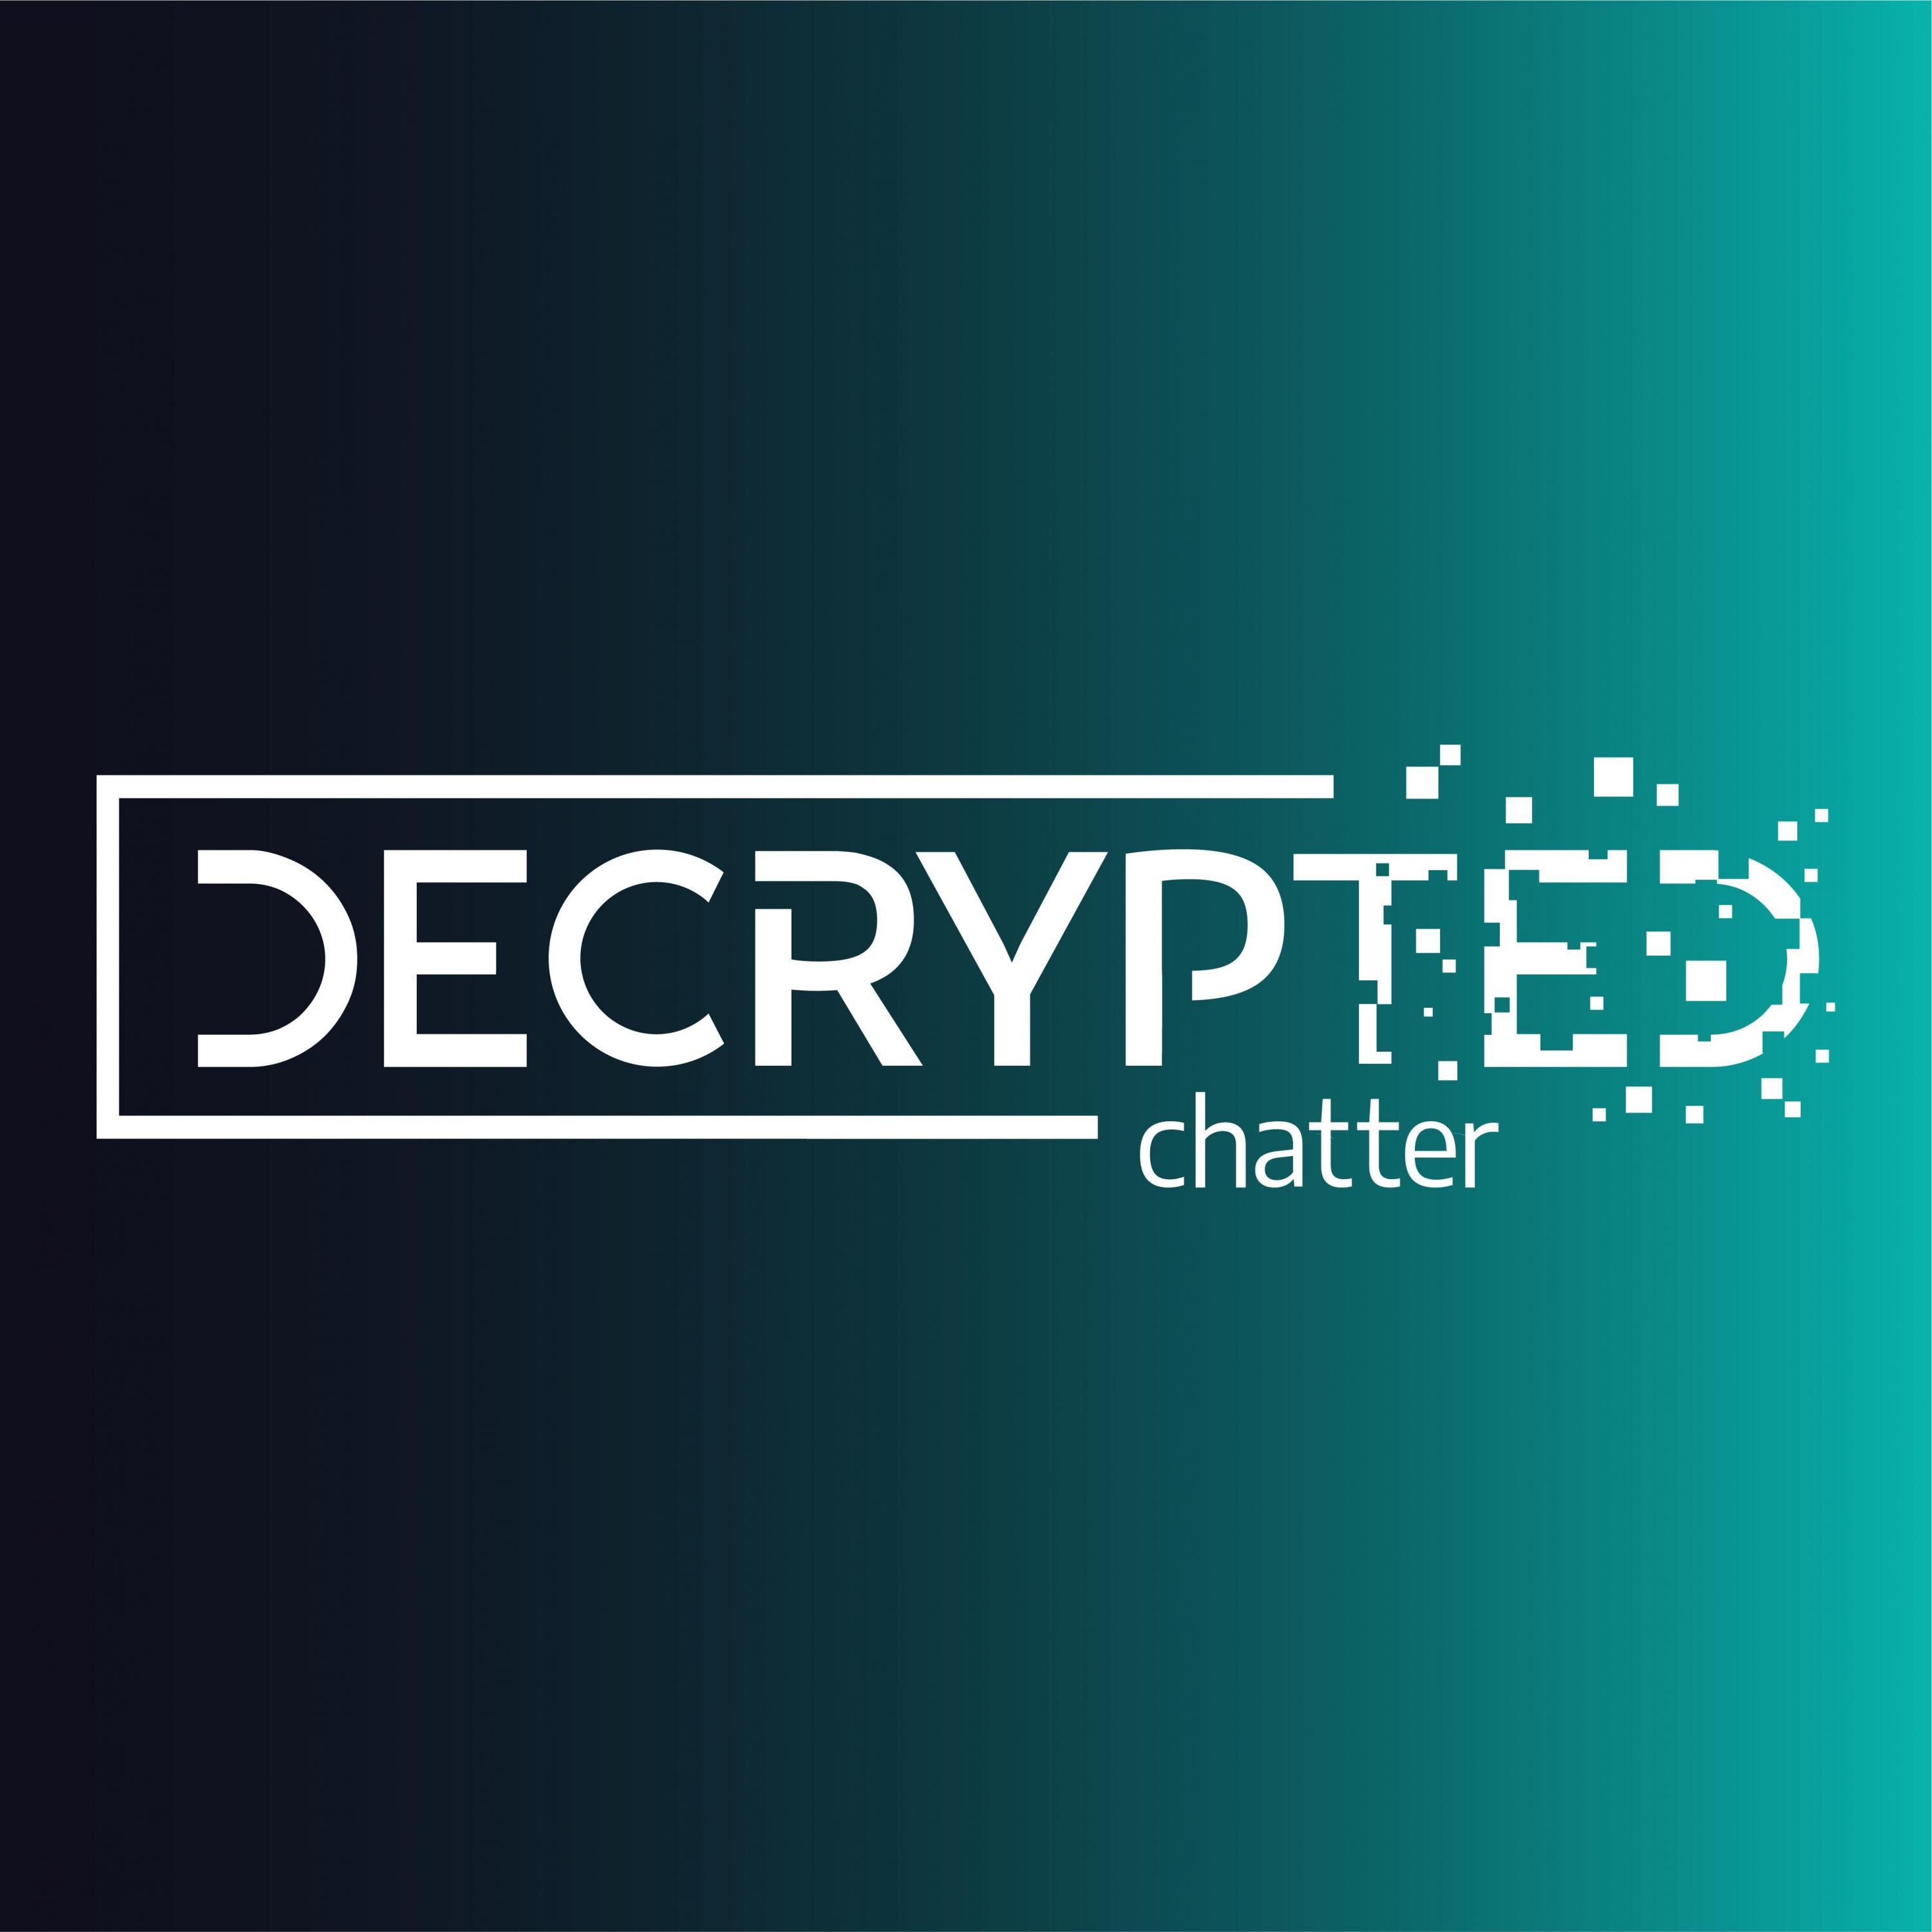 Decrypted Chatter